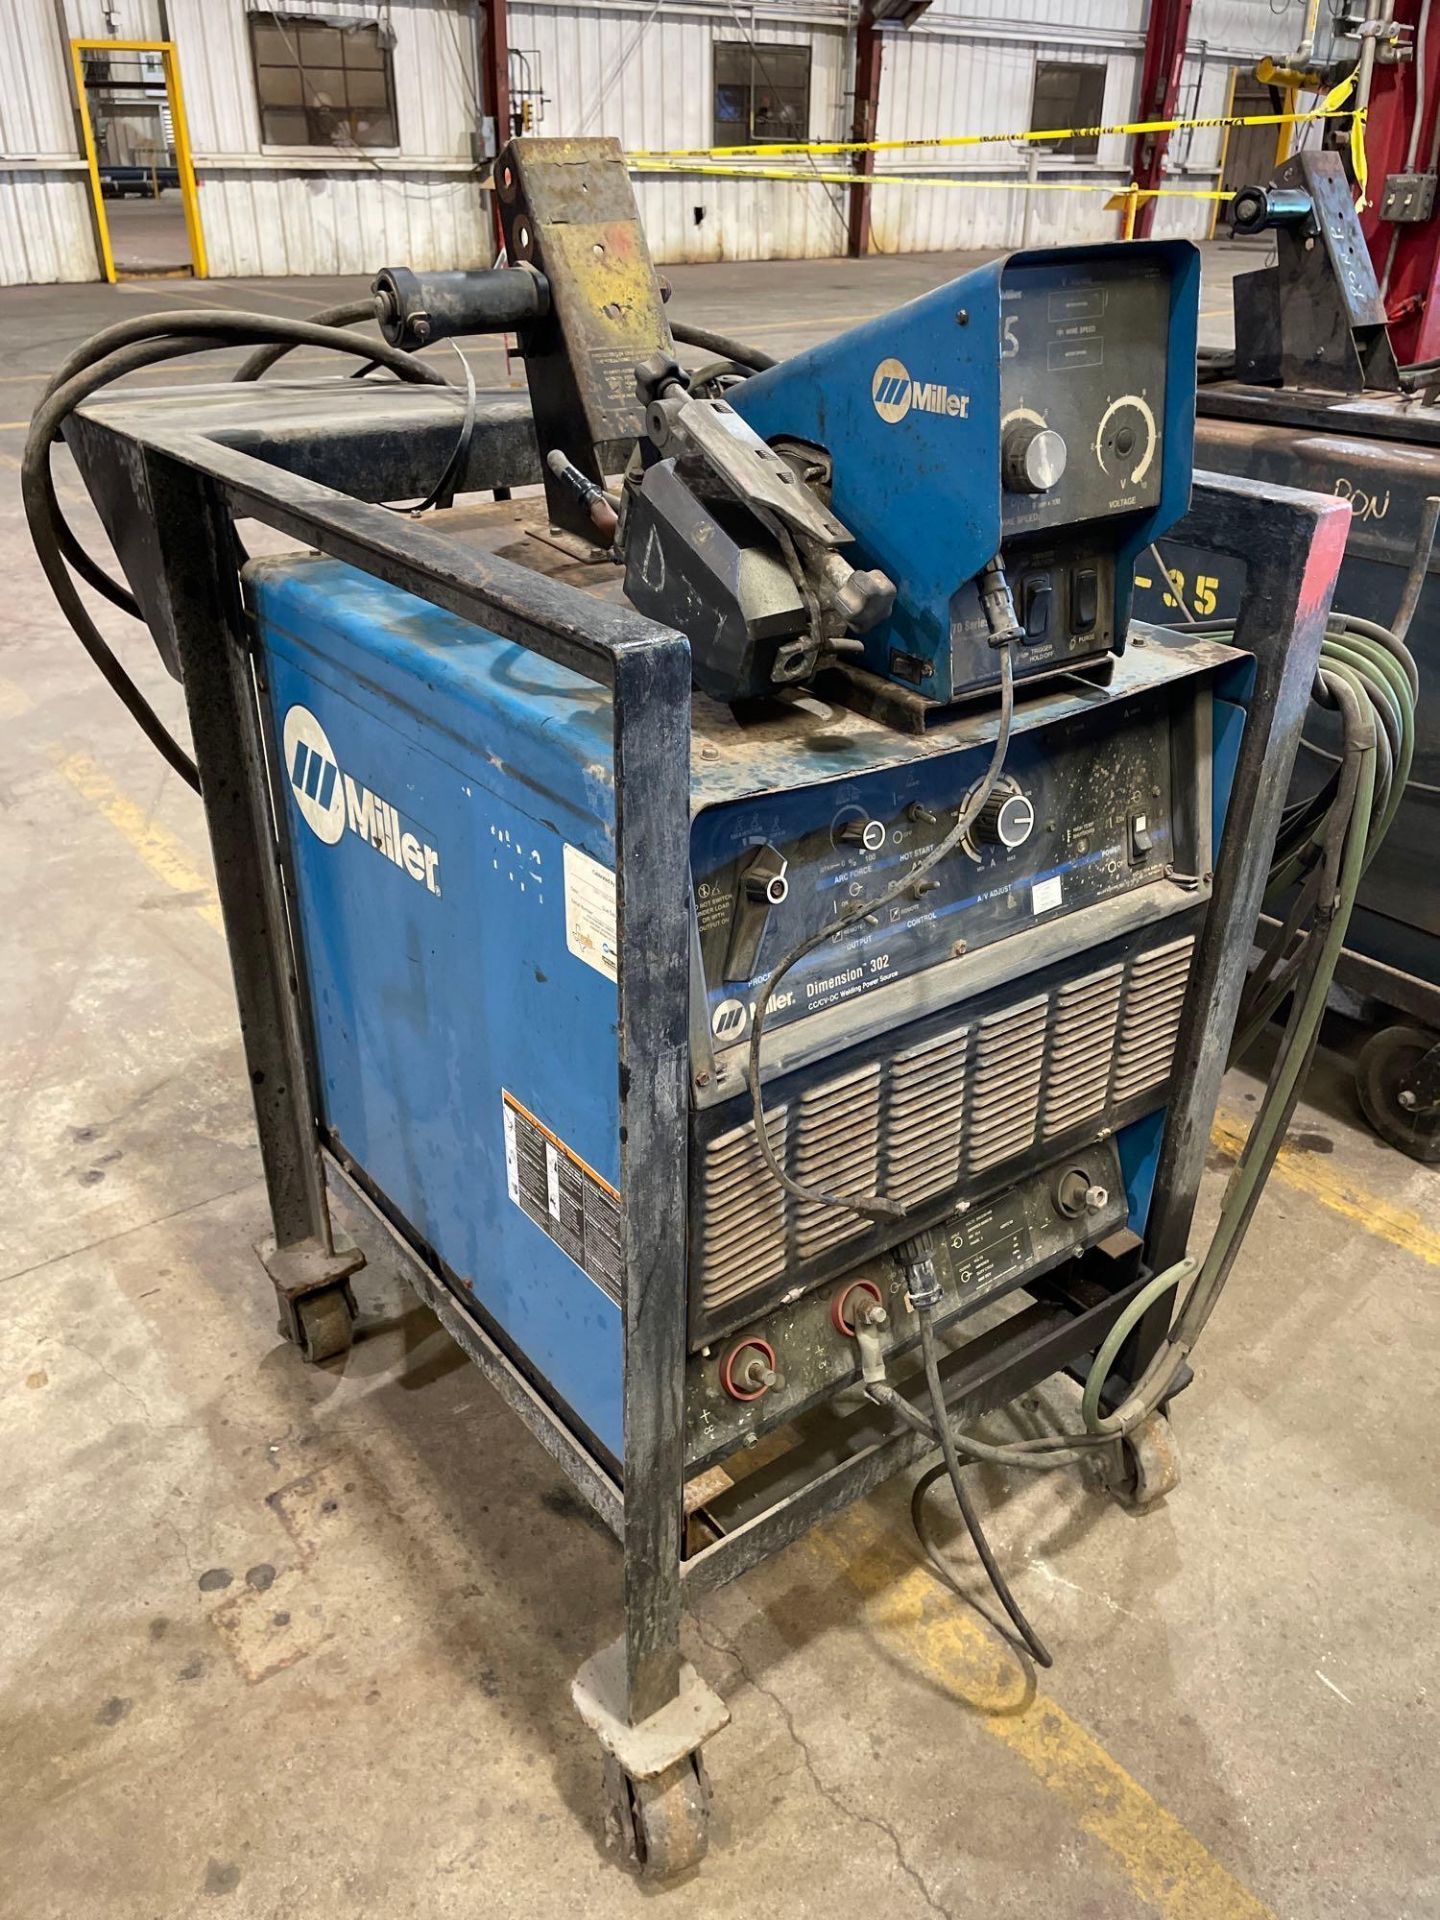 Miller Dimension 302 CC/DC Welding Power Source, with 70 Series 24V Wire Feeder. - Image 2 of 7